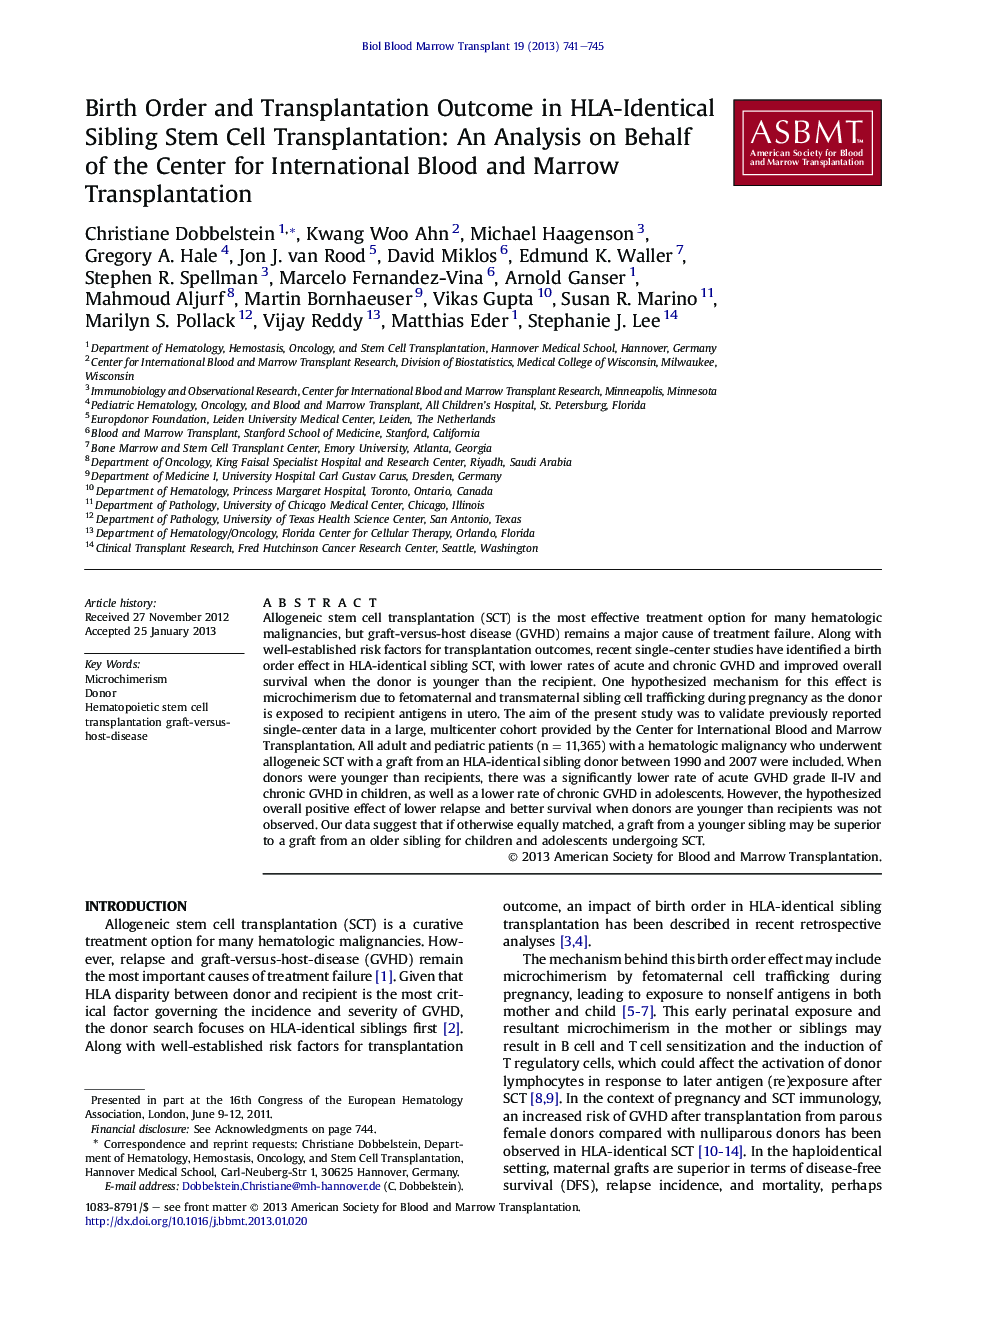 Birth Order and Transplantation Outcome in HLA-Identical Sibling Stem Cell Transplantation: An Analysis on Behalf of the Center for International Blood and Marrow Transplantation 